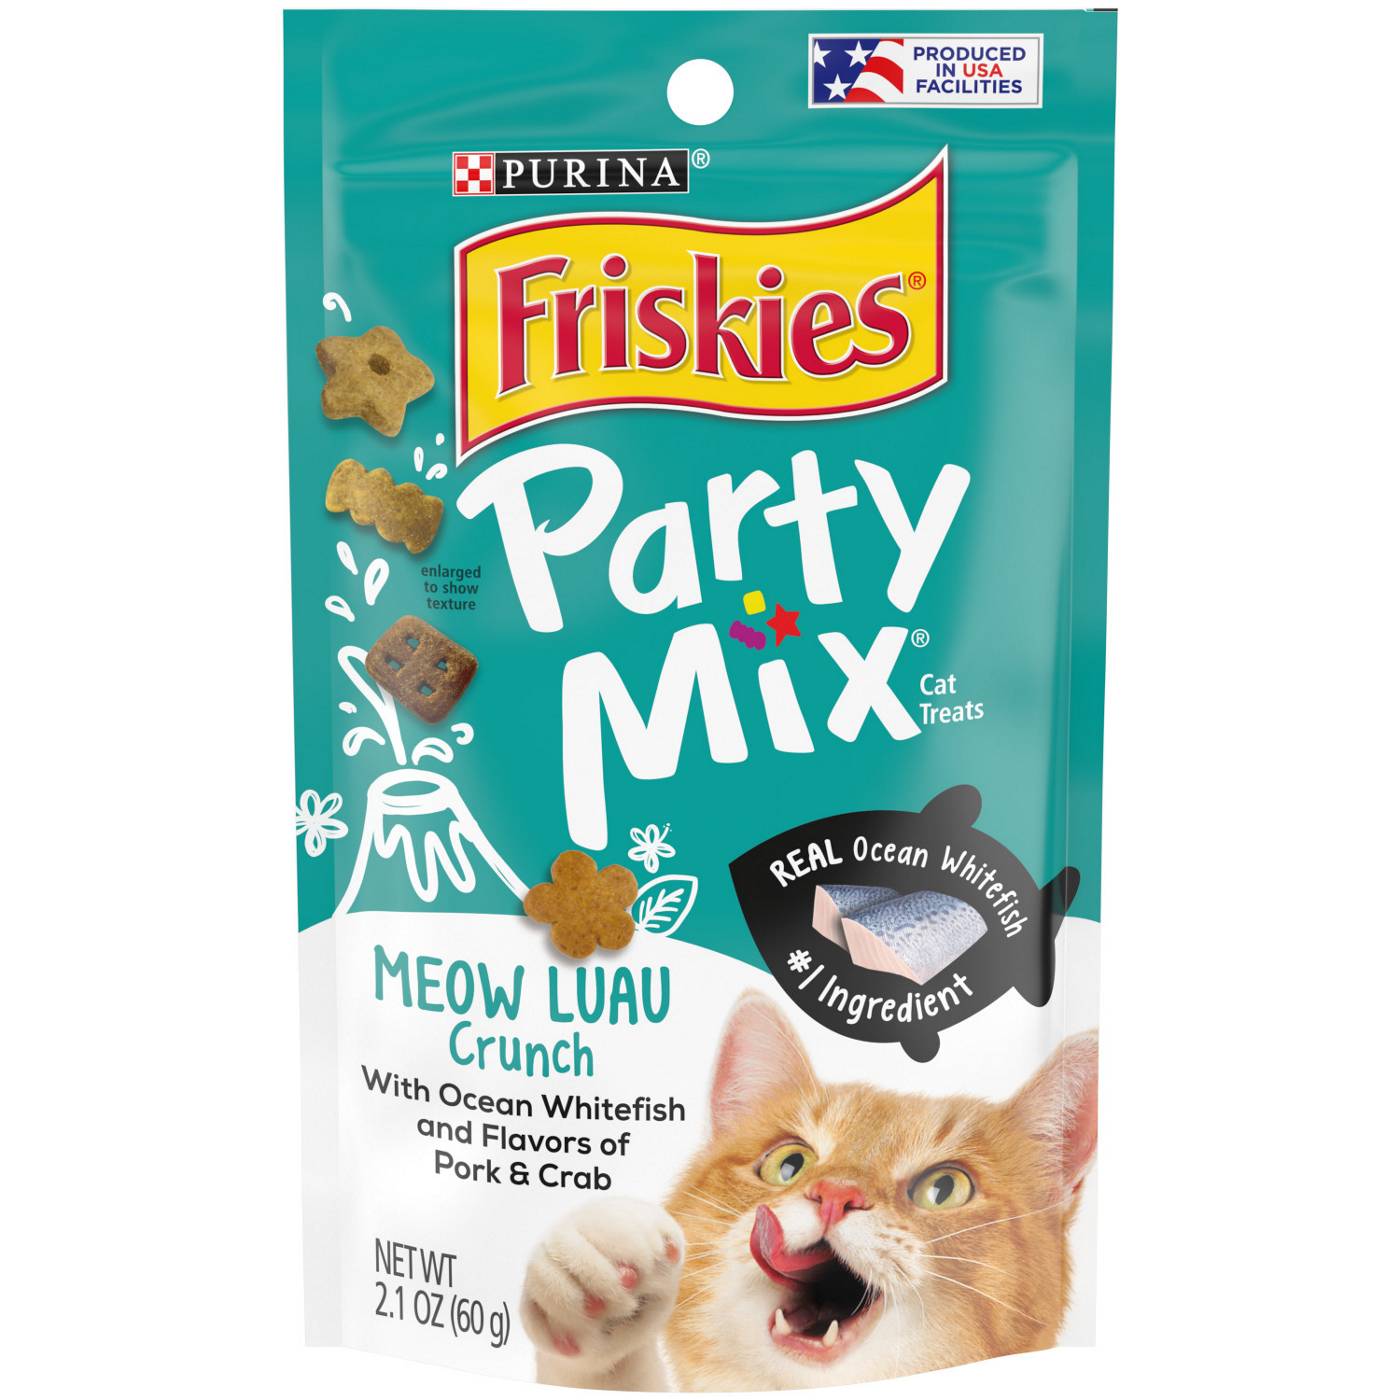 Friskies Purina Friskies Made in USA Facilities Cat Treats, Party Mix Meow Luau Crunch; image 1 of 9